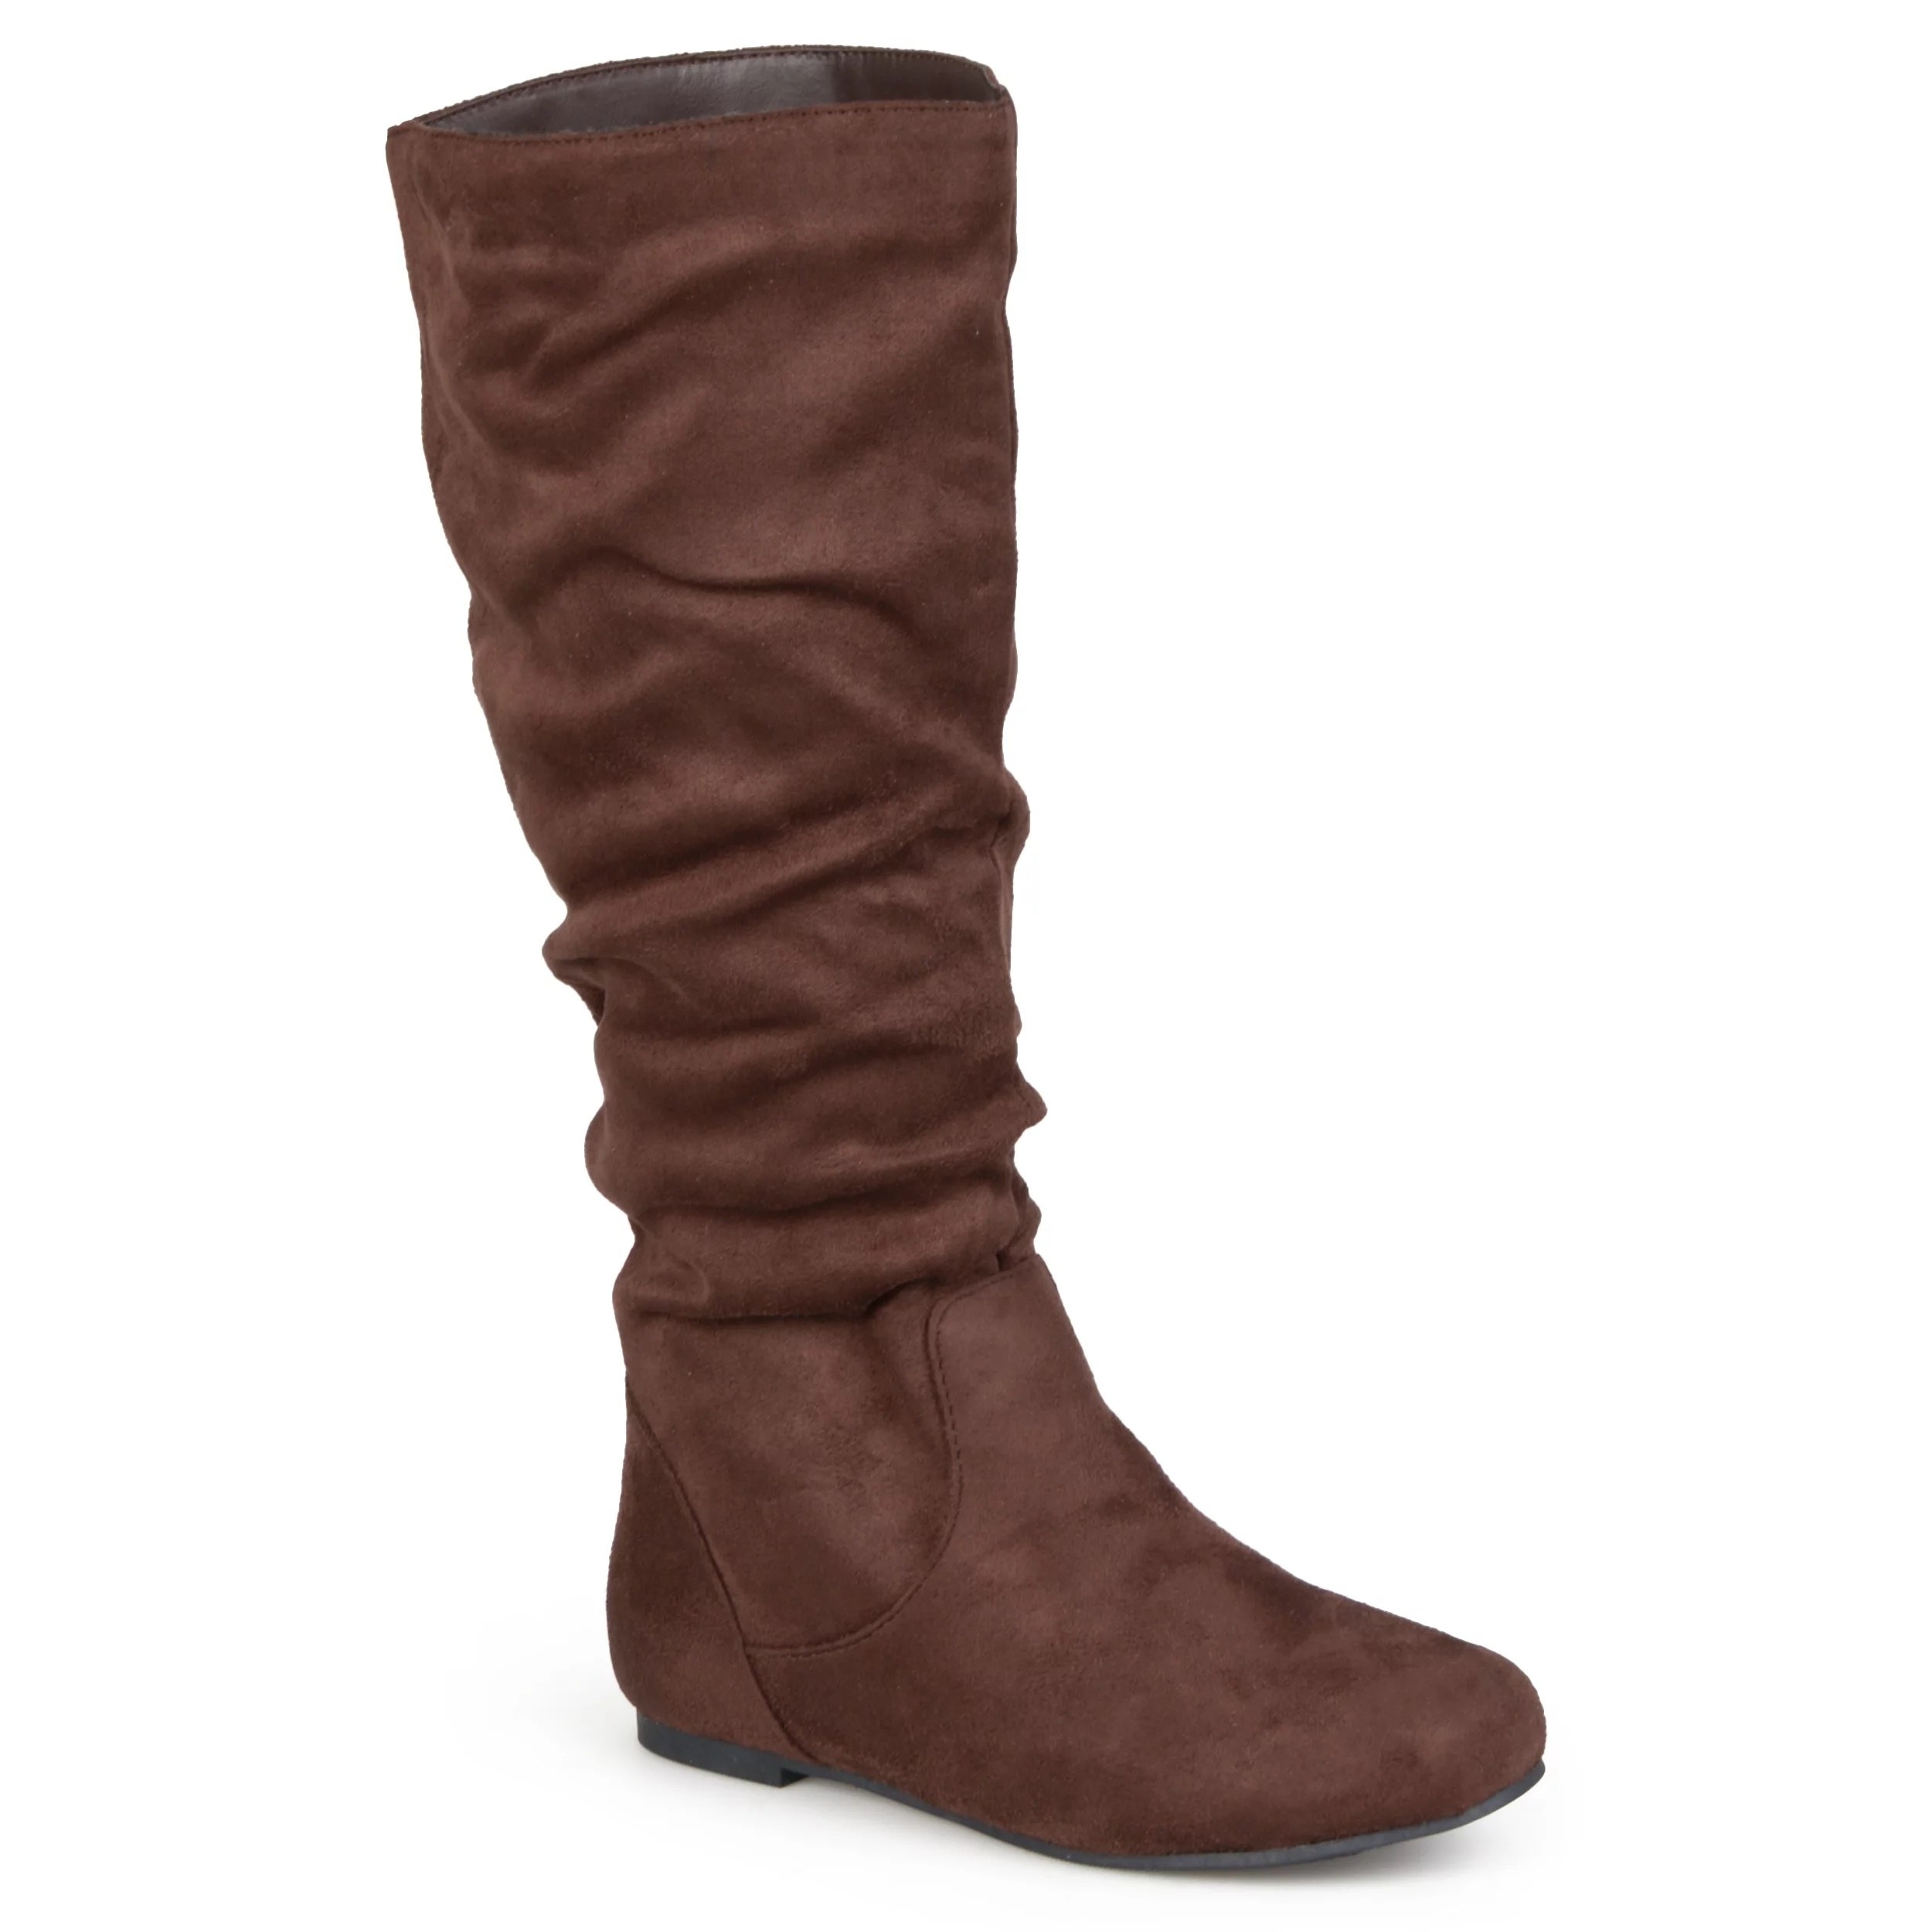 A tall brown boot